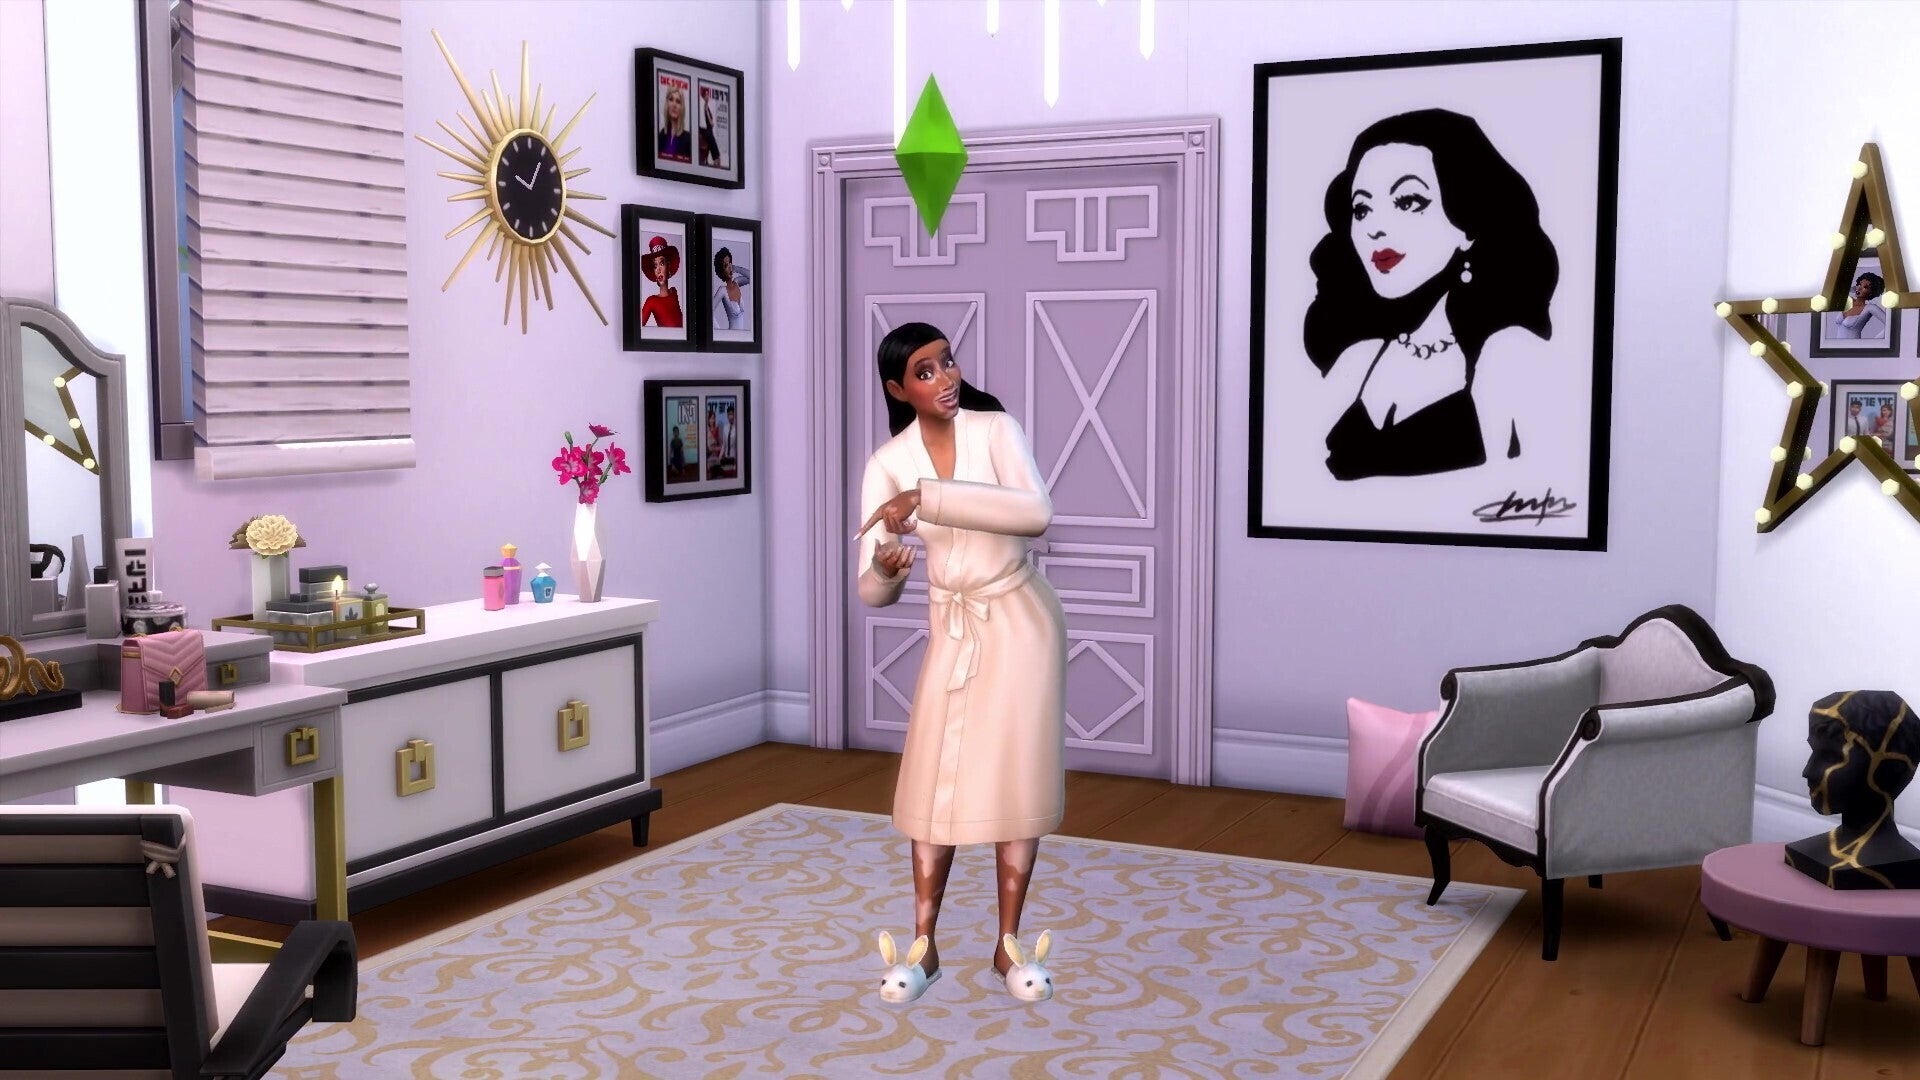 A Vitiligo Skin Feature Is Coming To The Latest ‘Sims’ Game With Help From Winnie Harlow